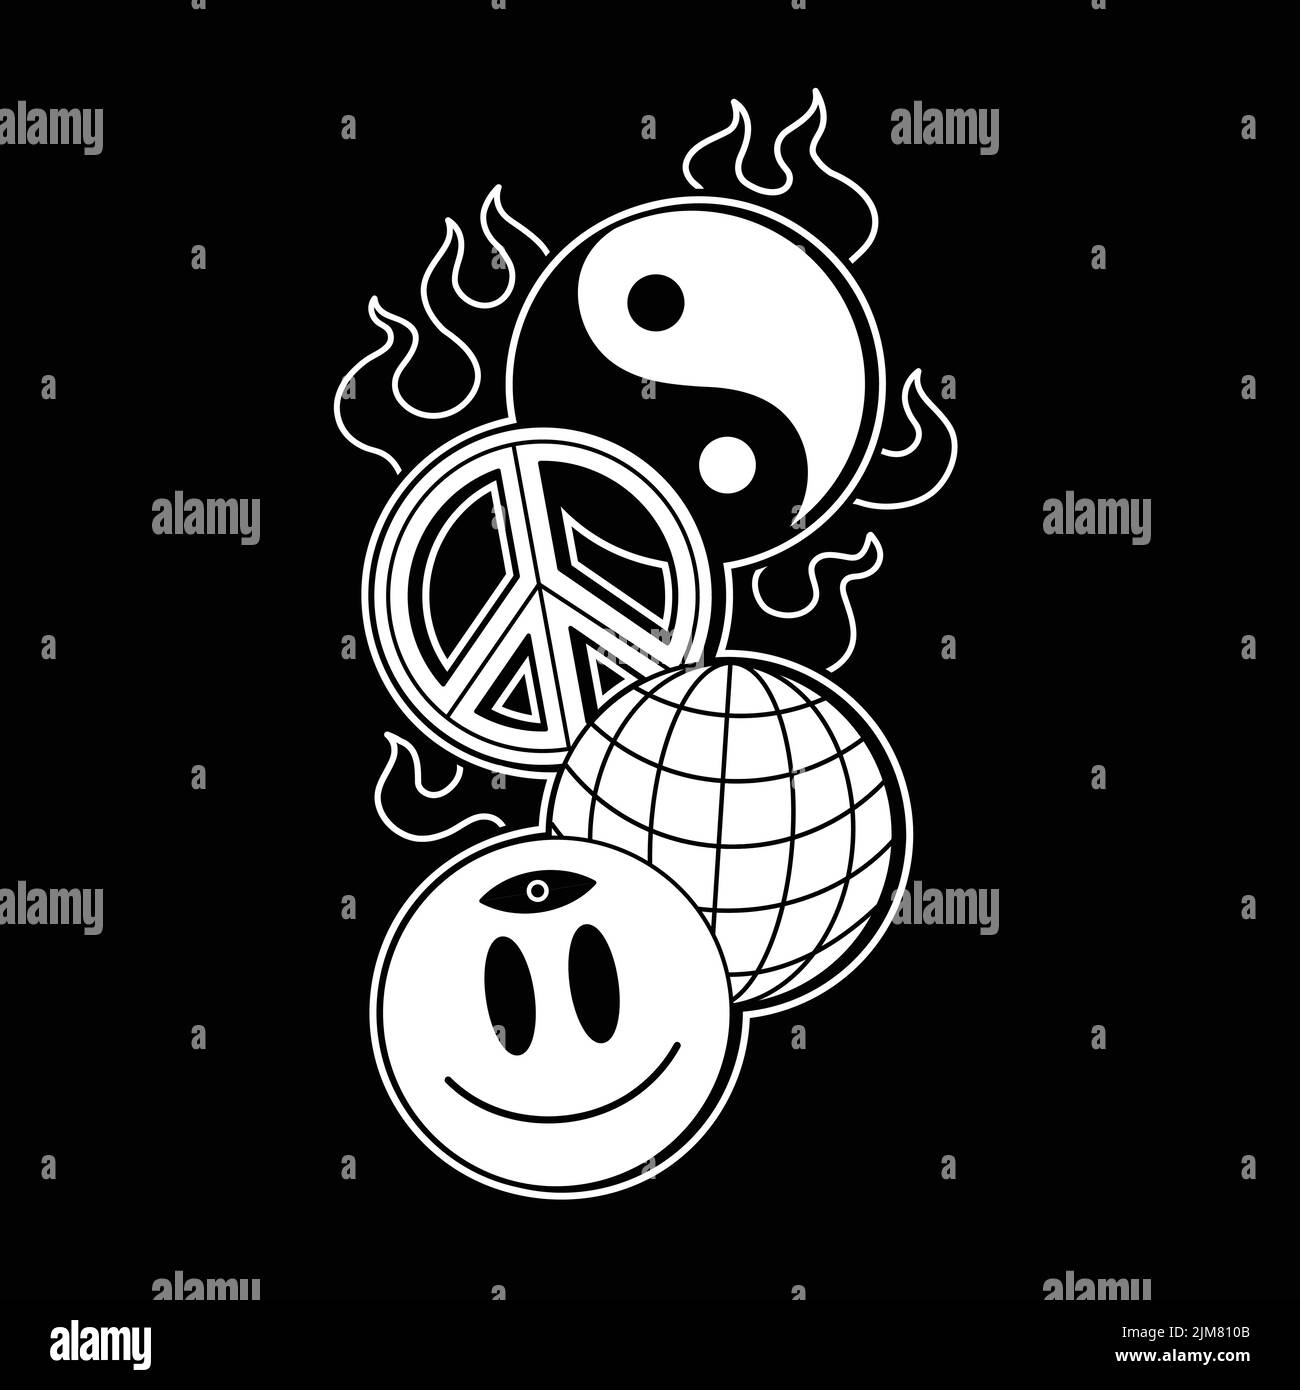 Yin Yang,sphere,smile face,peace signs burn in fire.Vector line graphic illustration logo design.Yin yang,earth sphere,smile face,hippie peace symbol,techno print for t-shirt,tee,poster concept Stock Vector